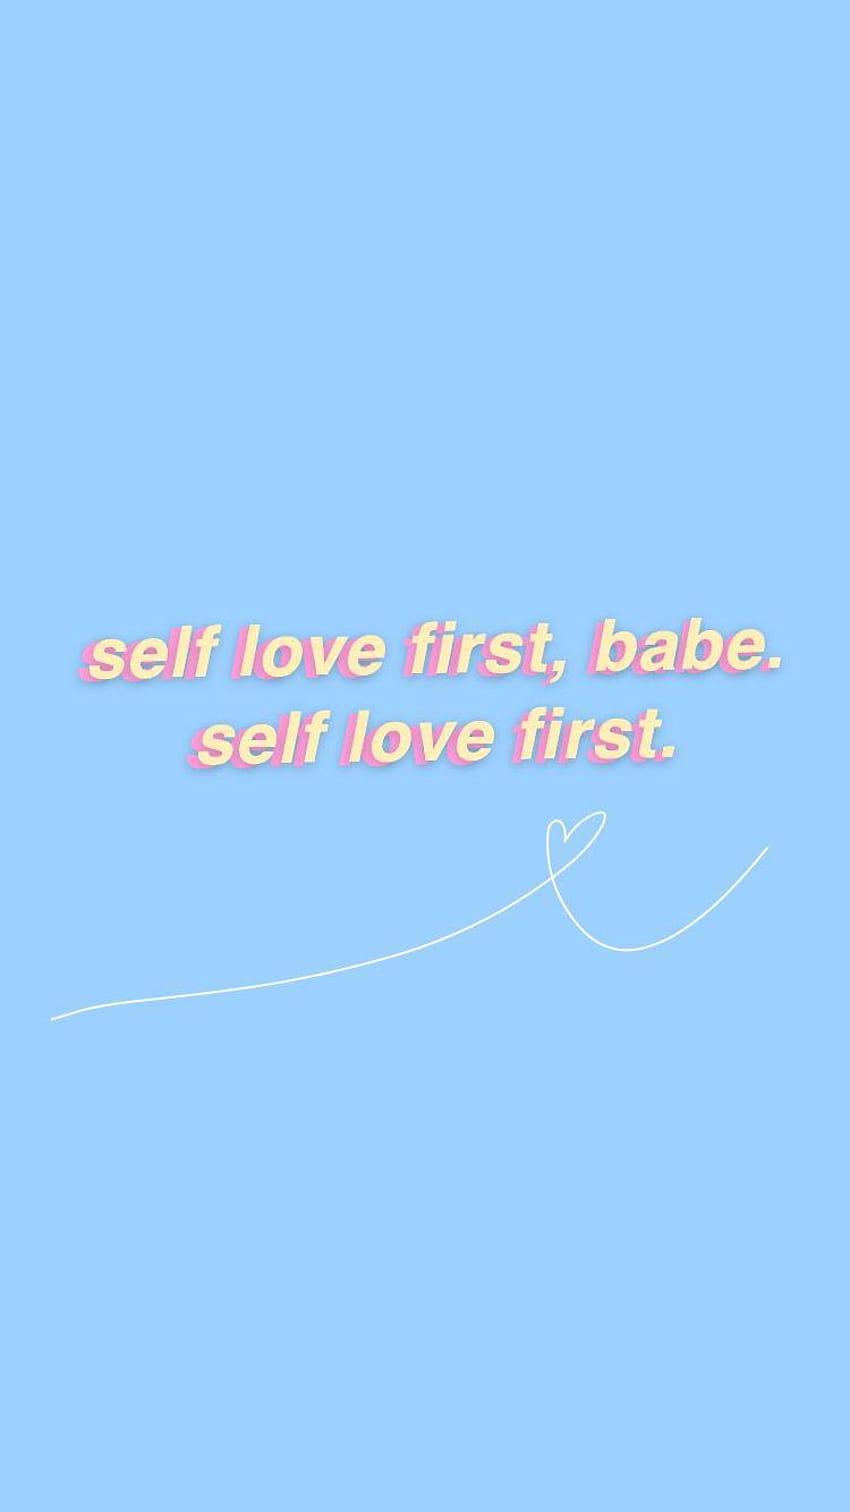 Quotes, Self Love, Confidence, Self Care, Caption Love, quotes aesthetic HD phone wallpaper